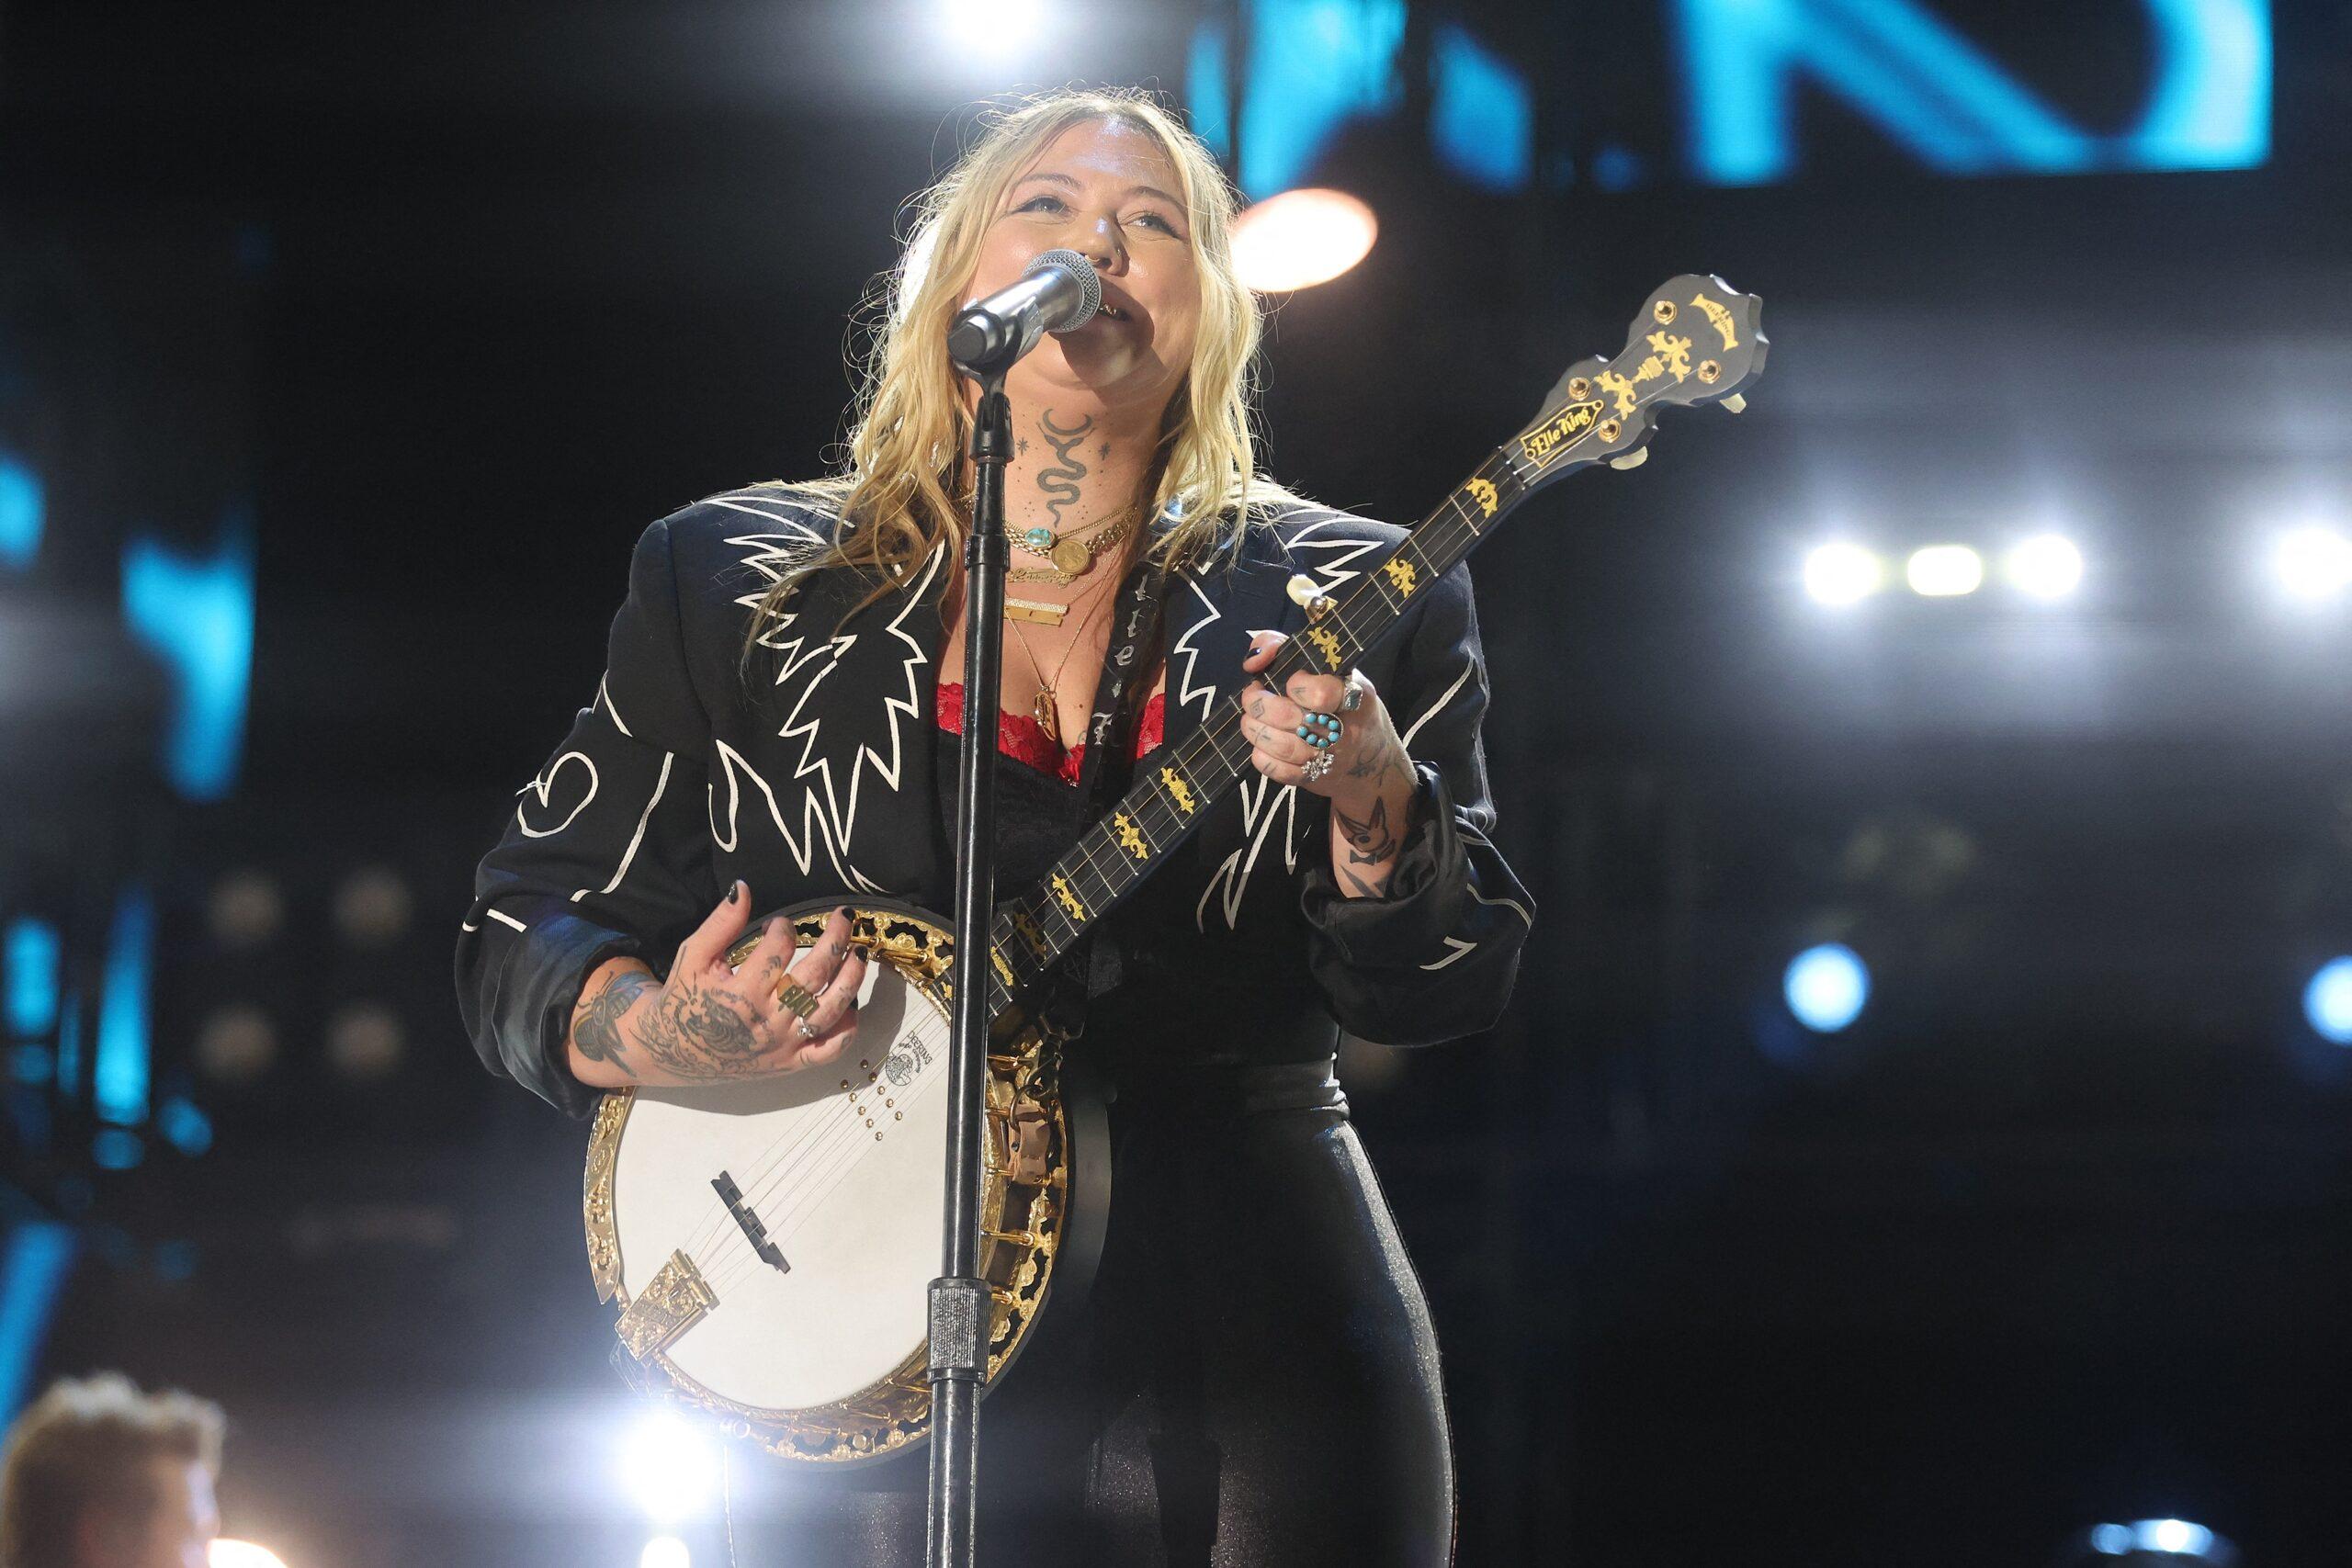 She performed drunkenly to the song Elle King Butchers by Dolly Parton [VIDEO]